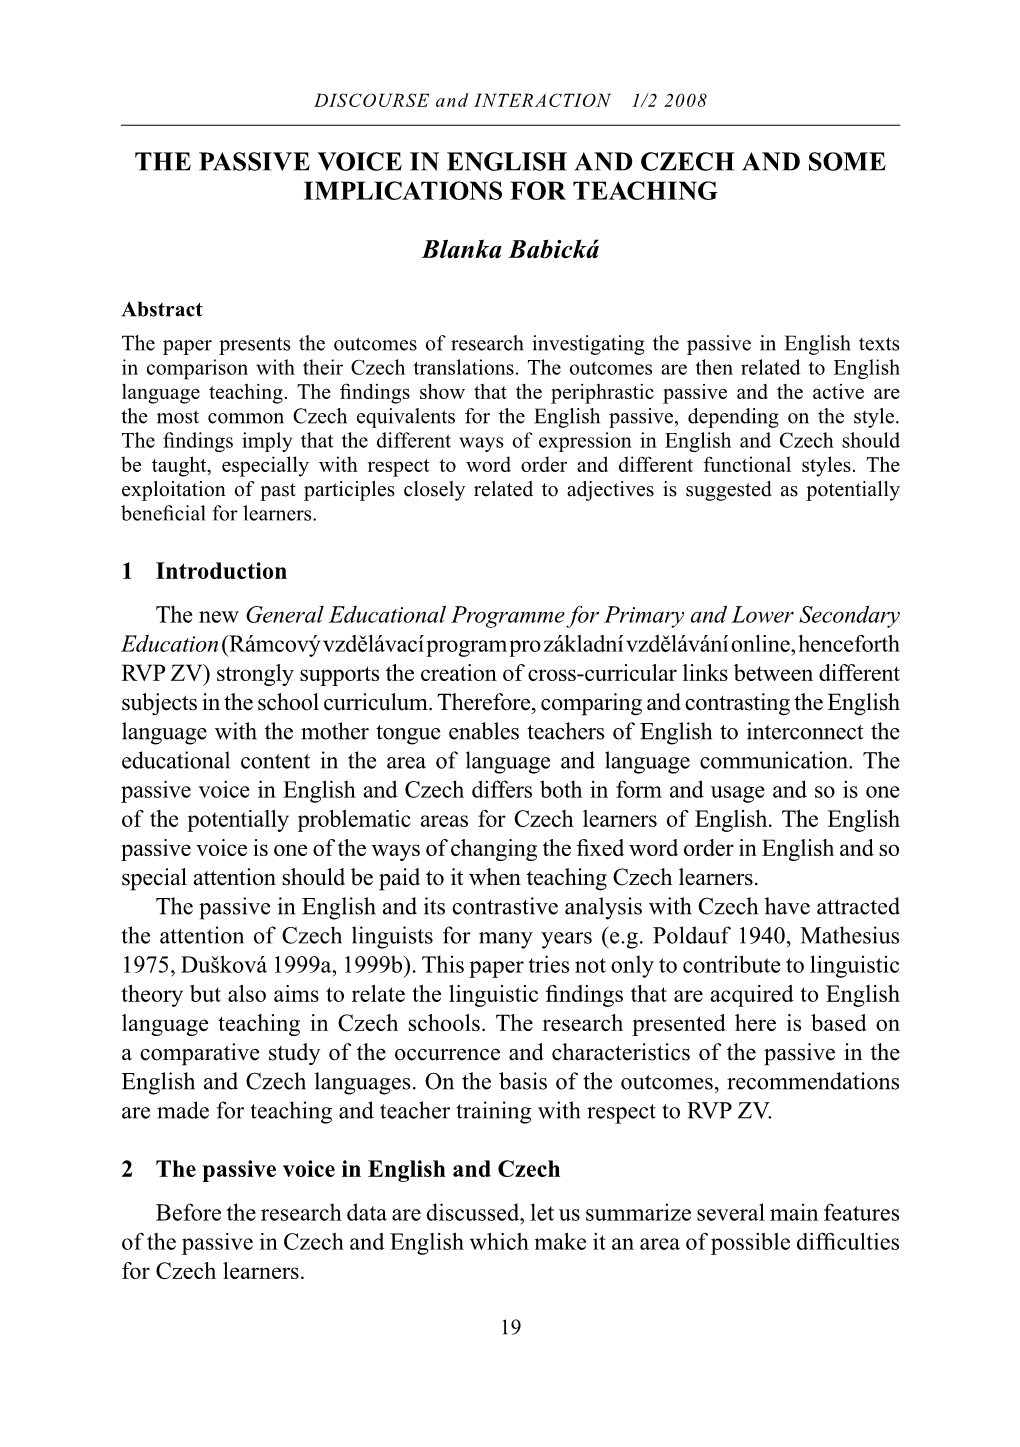 The Passive Voice in English and Czech and Some Implications for Teaching